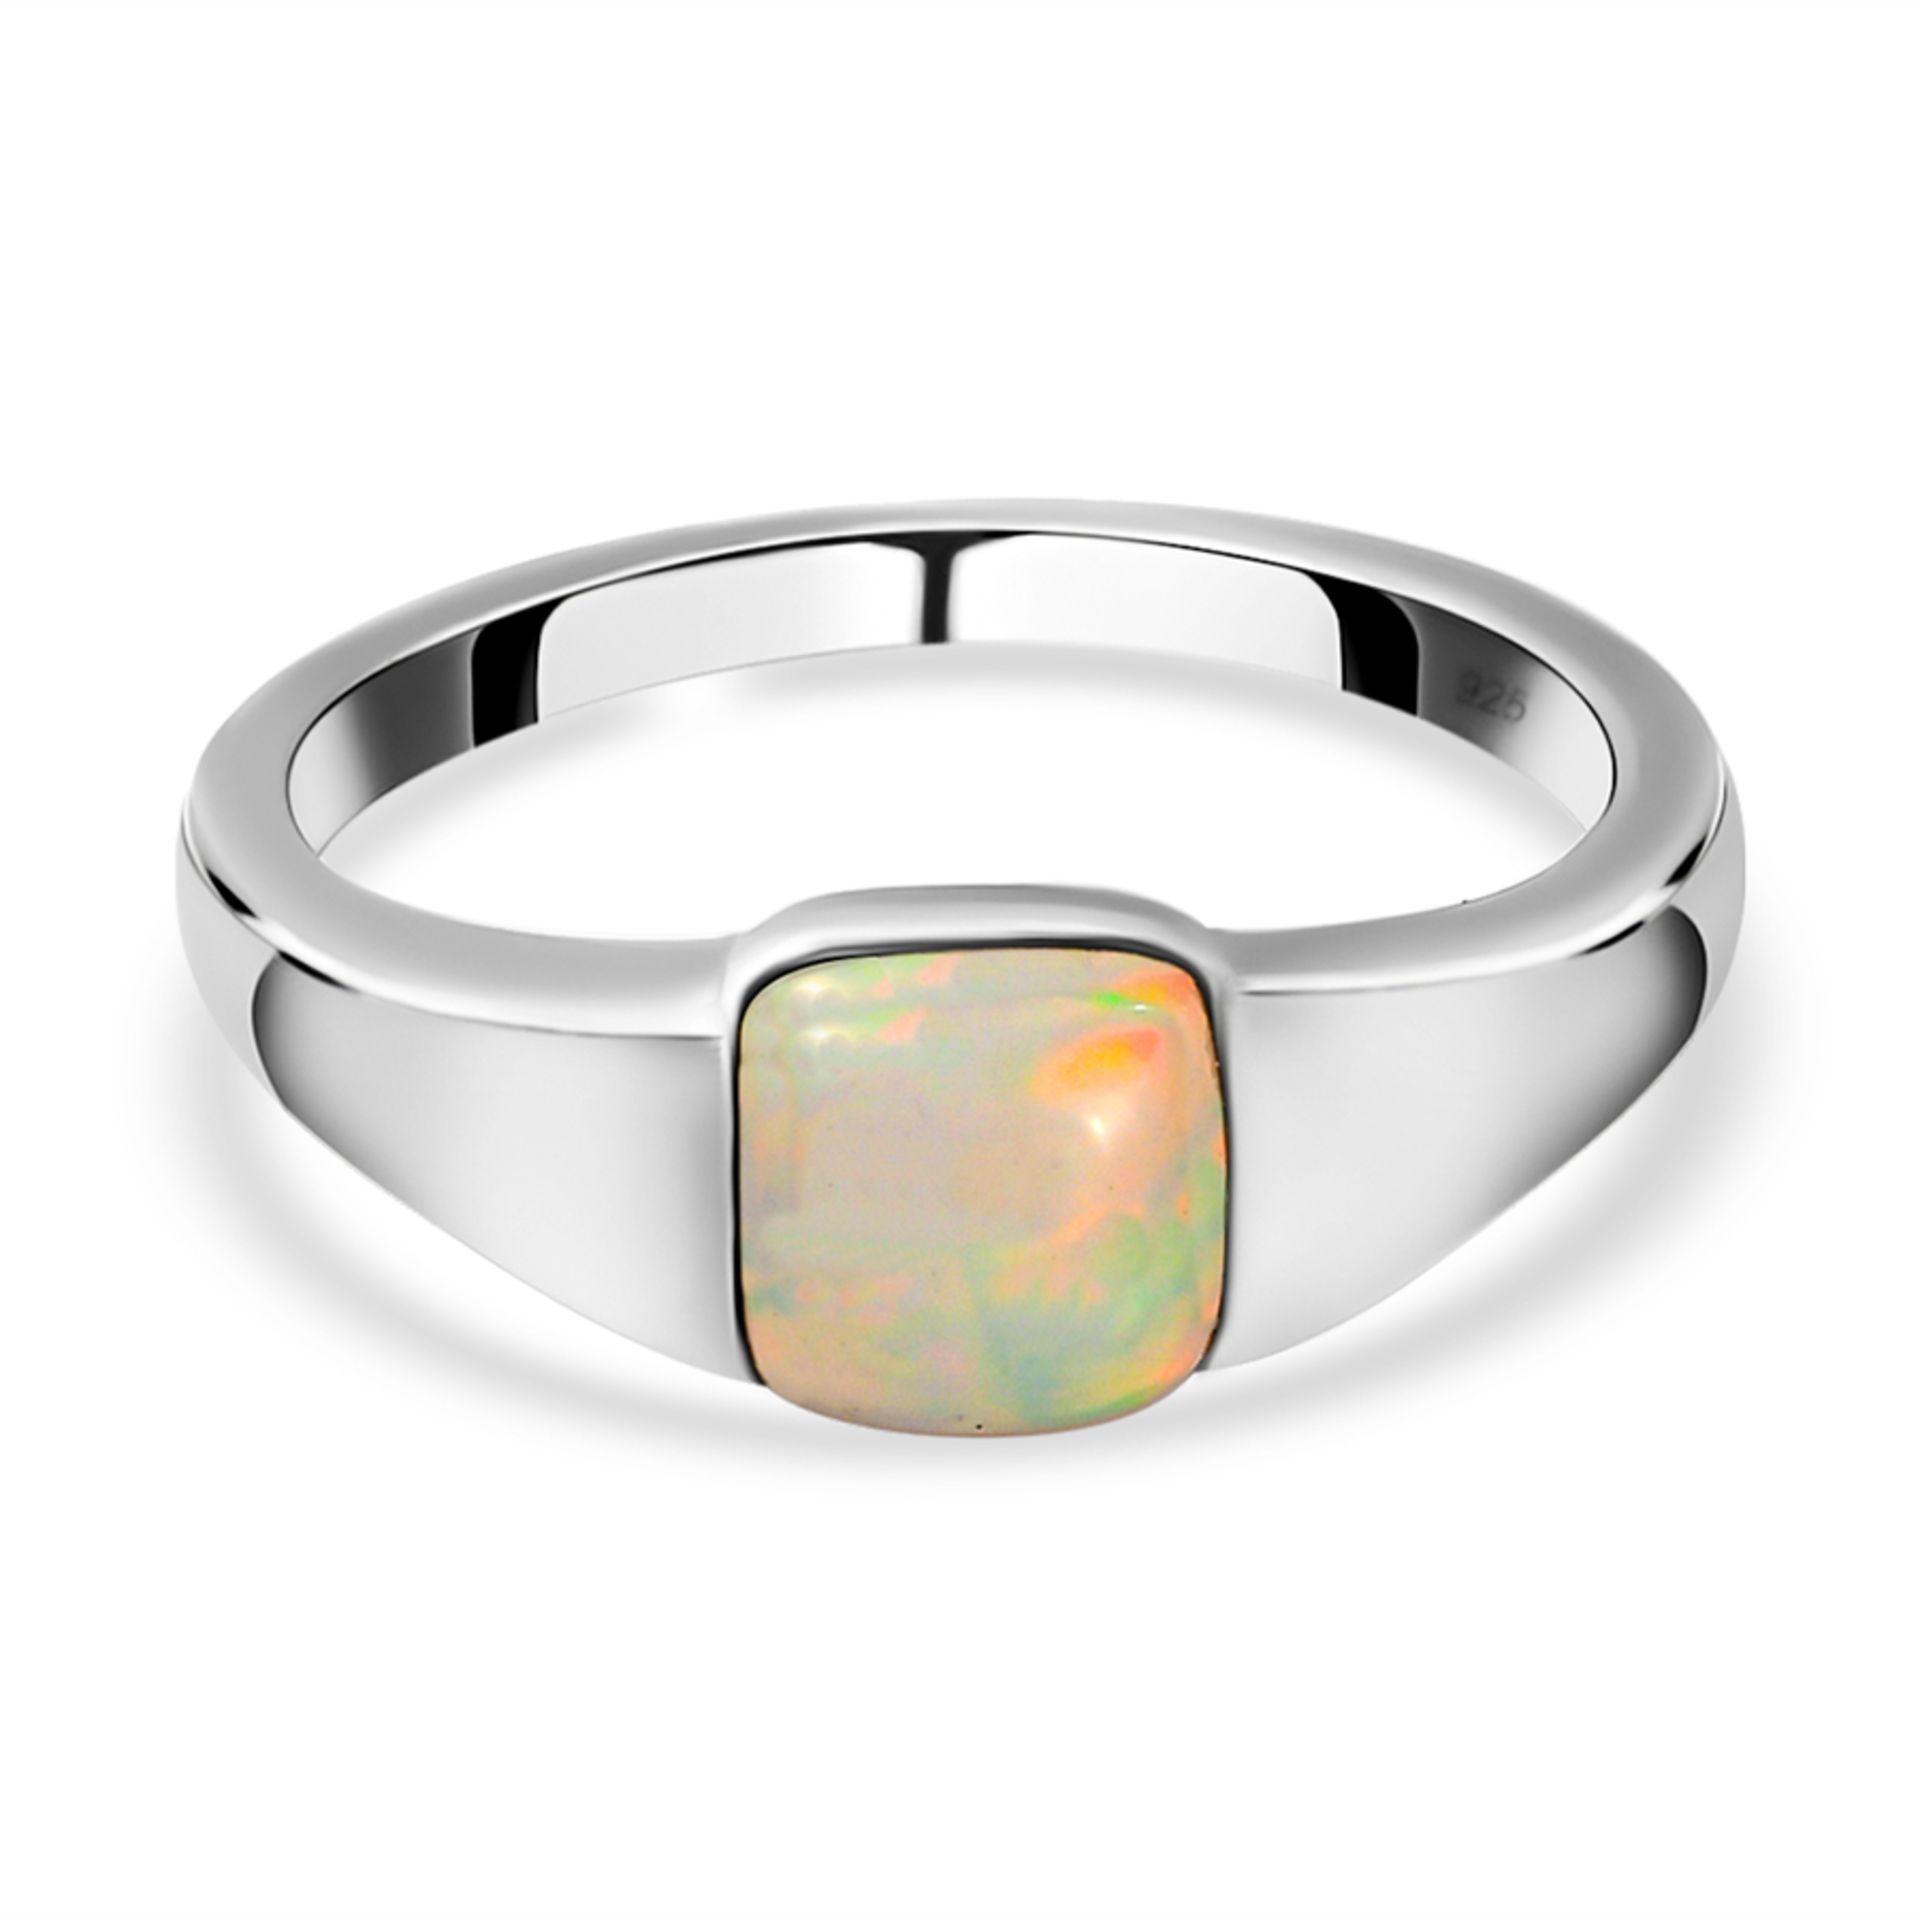 NEW!! Ethiopian Welo Opal Solitaire Ring in Platinum Overlay Sterling Silver - Image 2 of 4